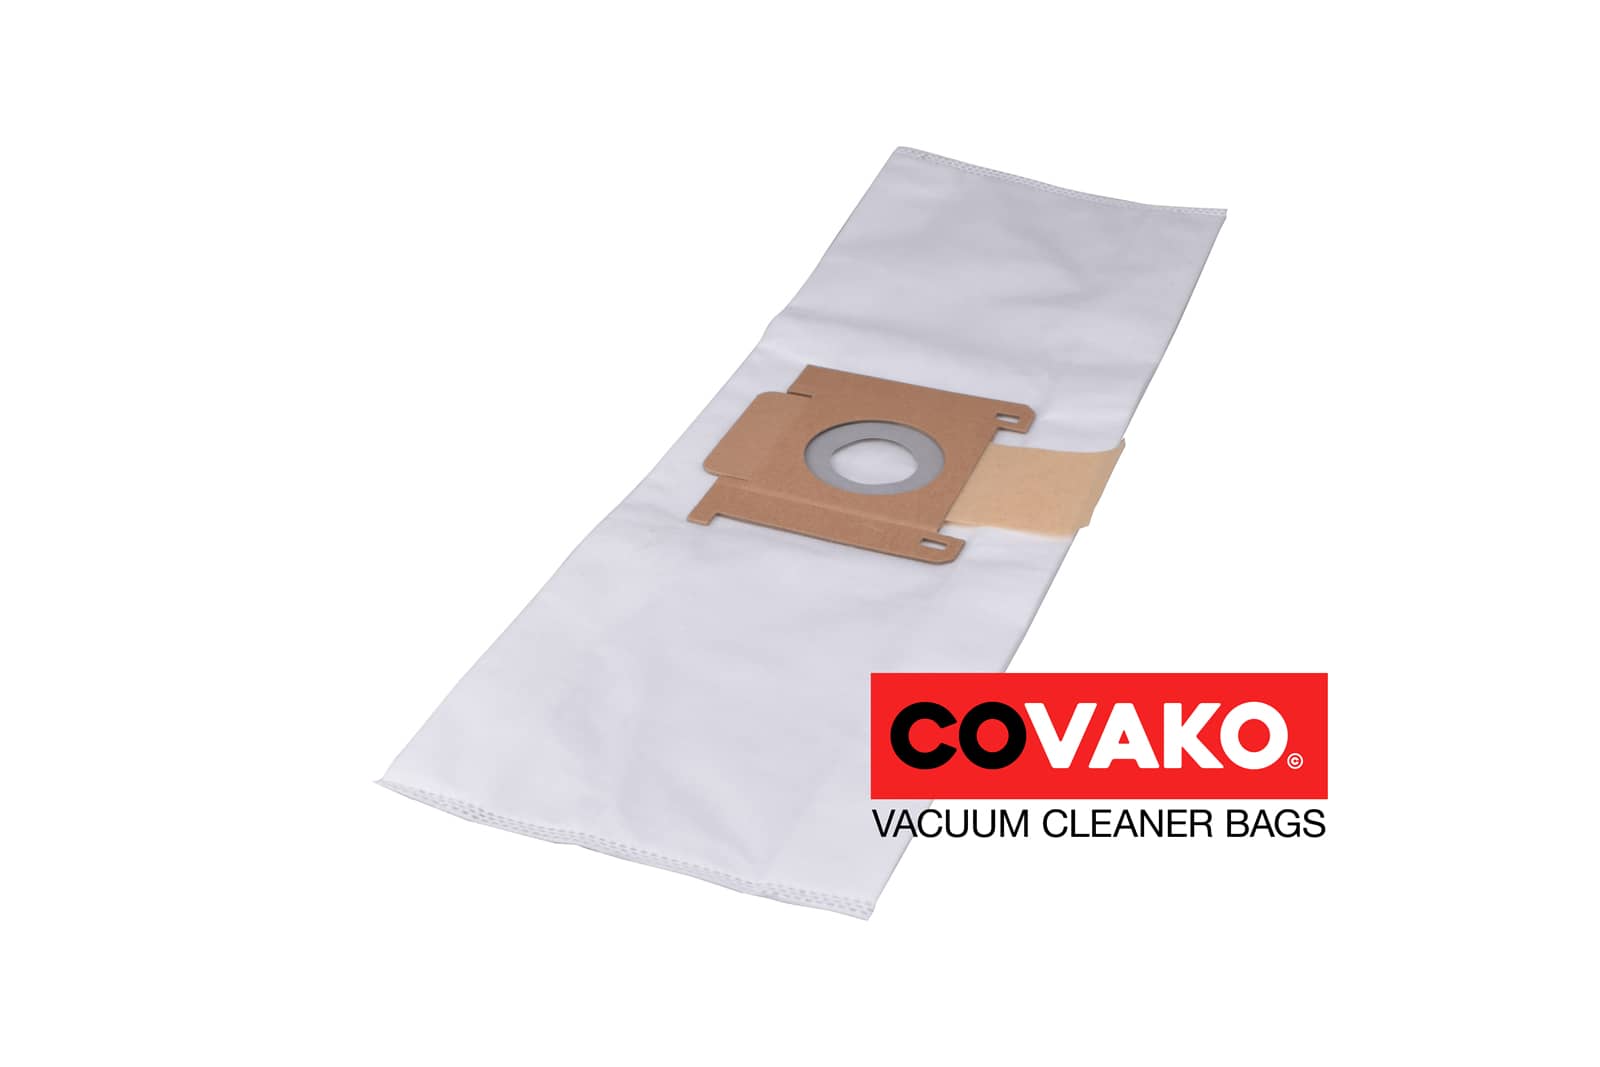 Oehme Otto Compacto 6 / Synthesis - Oehme Otto vacuum cleaner bags